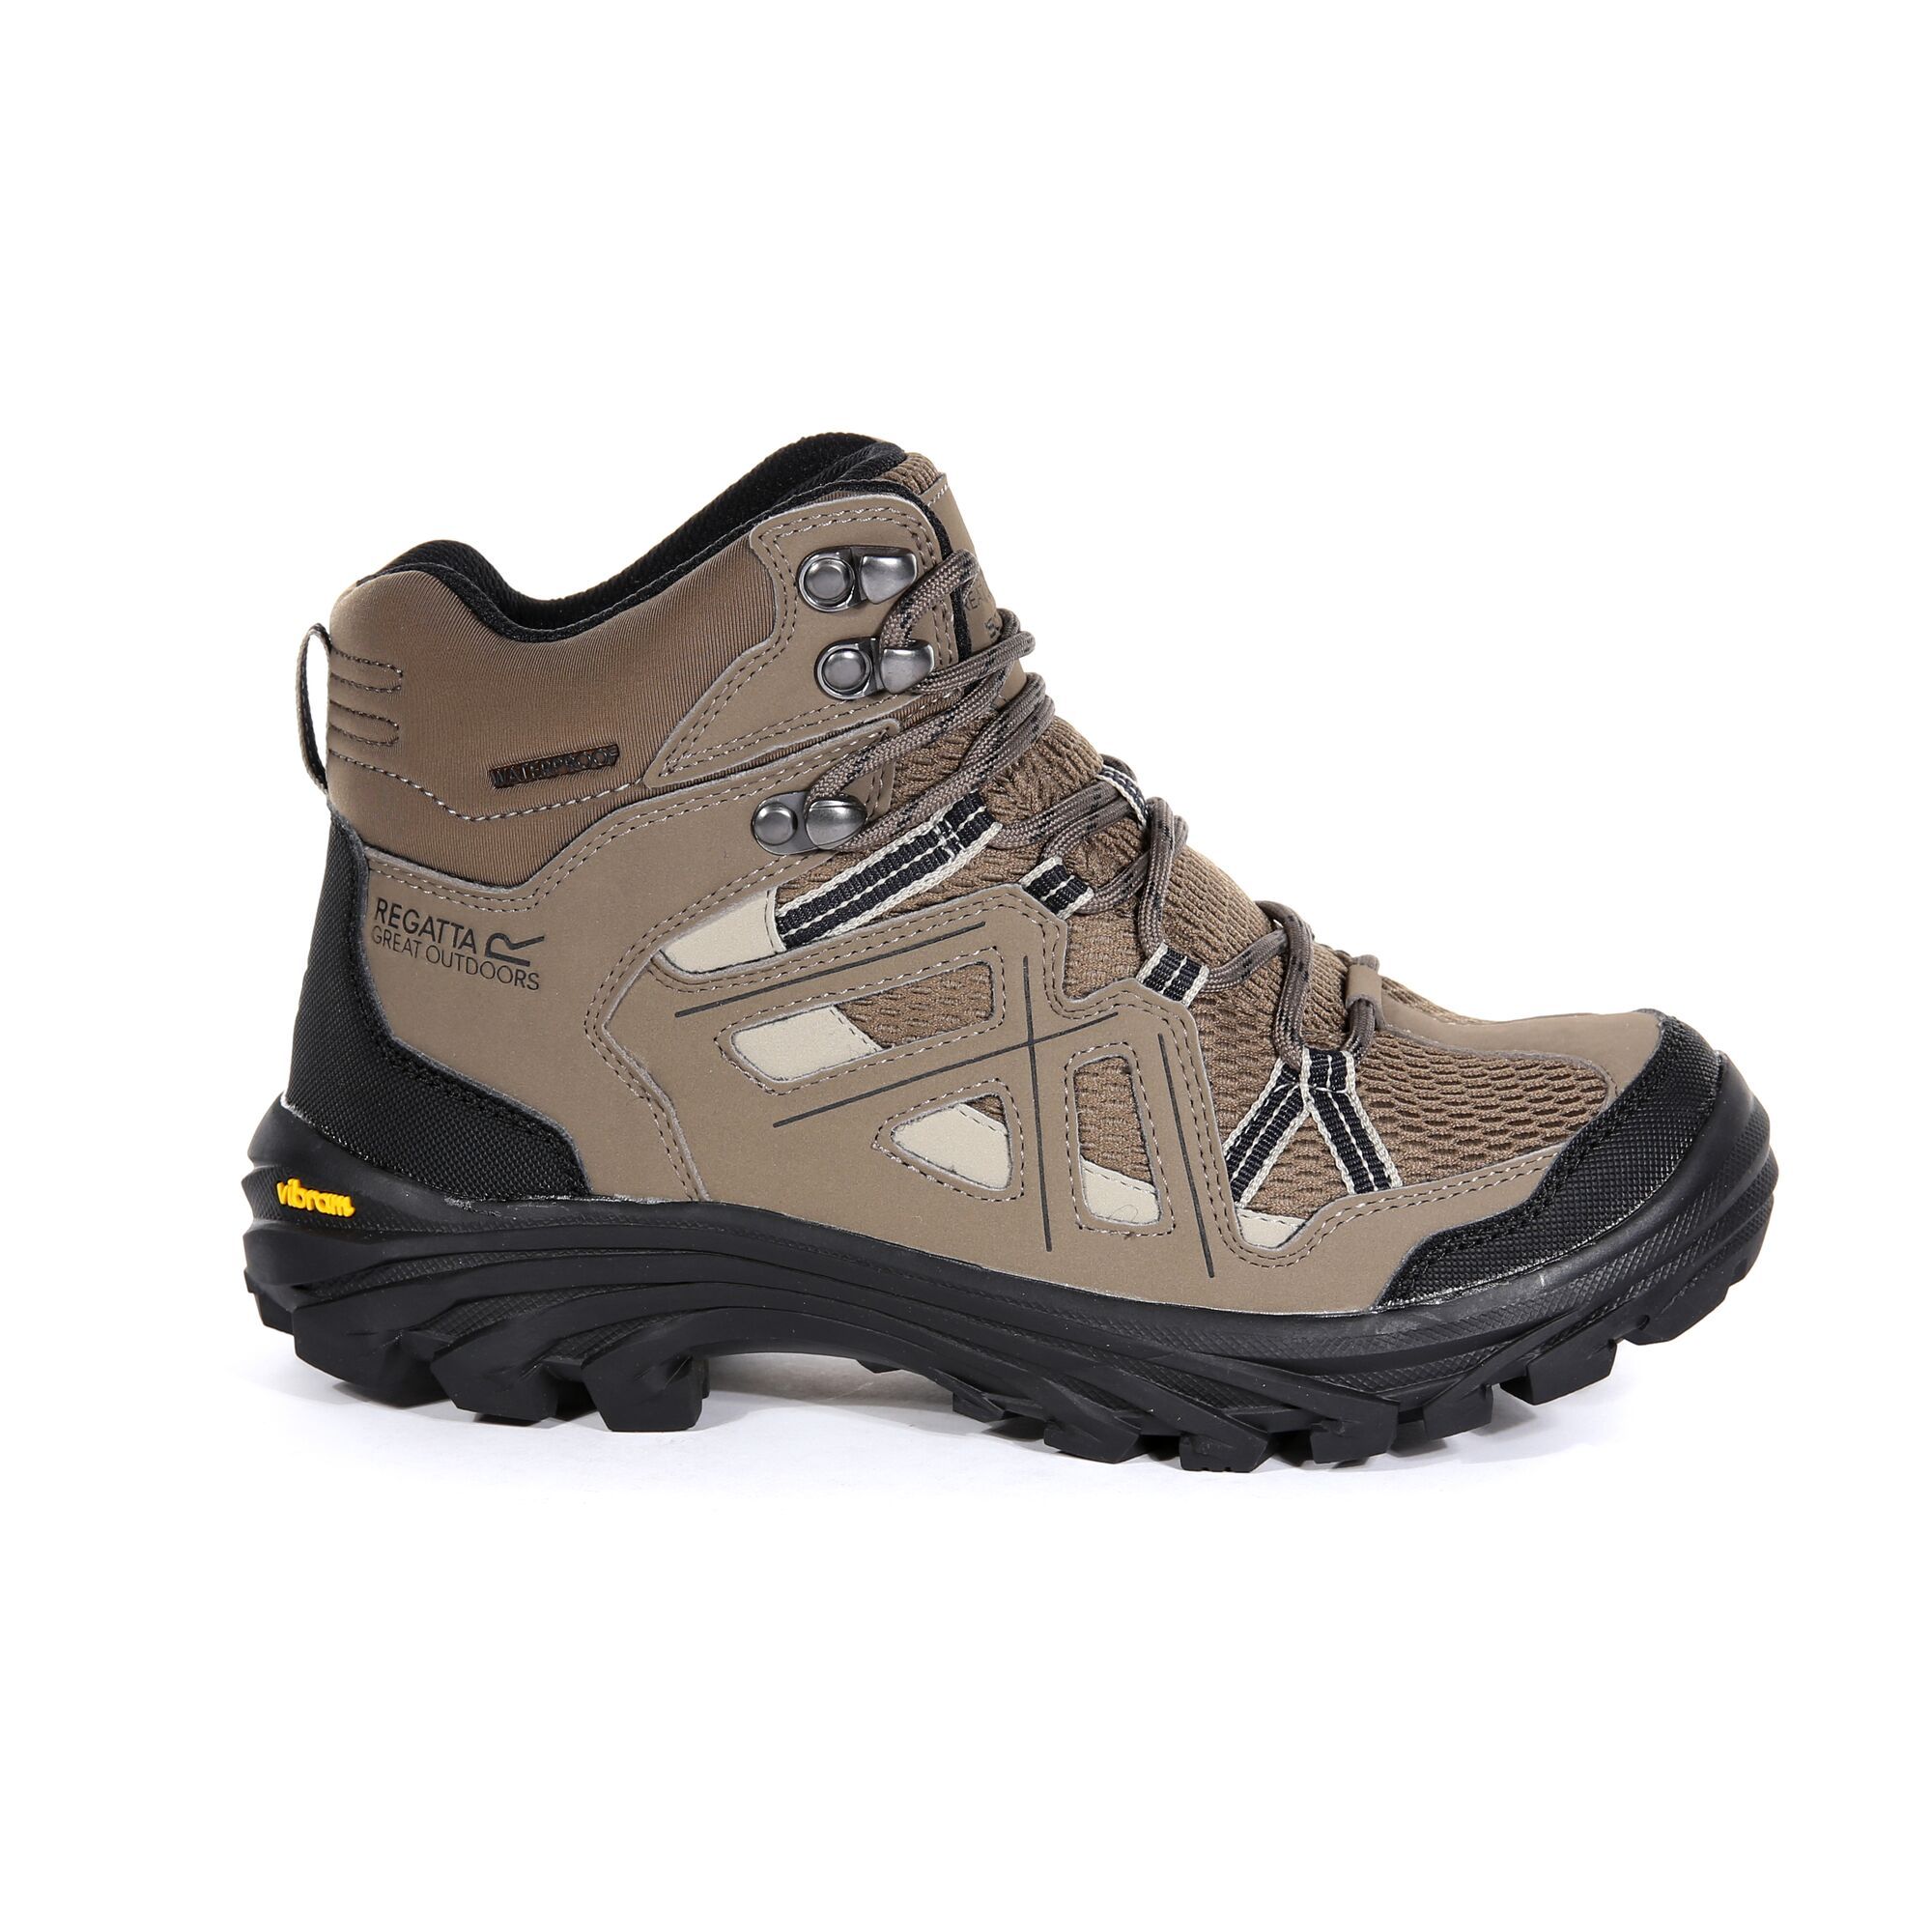 Womens hiking boots made of Isotex waterproof material. Seam sealed with internal membrane bootee liner. PU nubuck and breathable mesh upper. Hydropel water resistant technology. Deep padded neoprene collar and mesh tongue. Rubberised toe and heel bumpers. EVA comfort footbed. Stabilising shank technology. Vibram outsole for exceptional traction and durability. 45% Polyurathane, 55% Polyester.